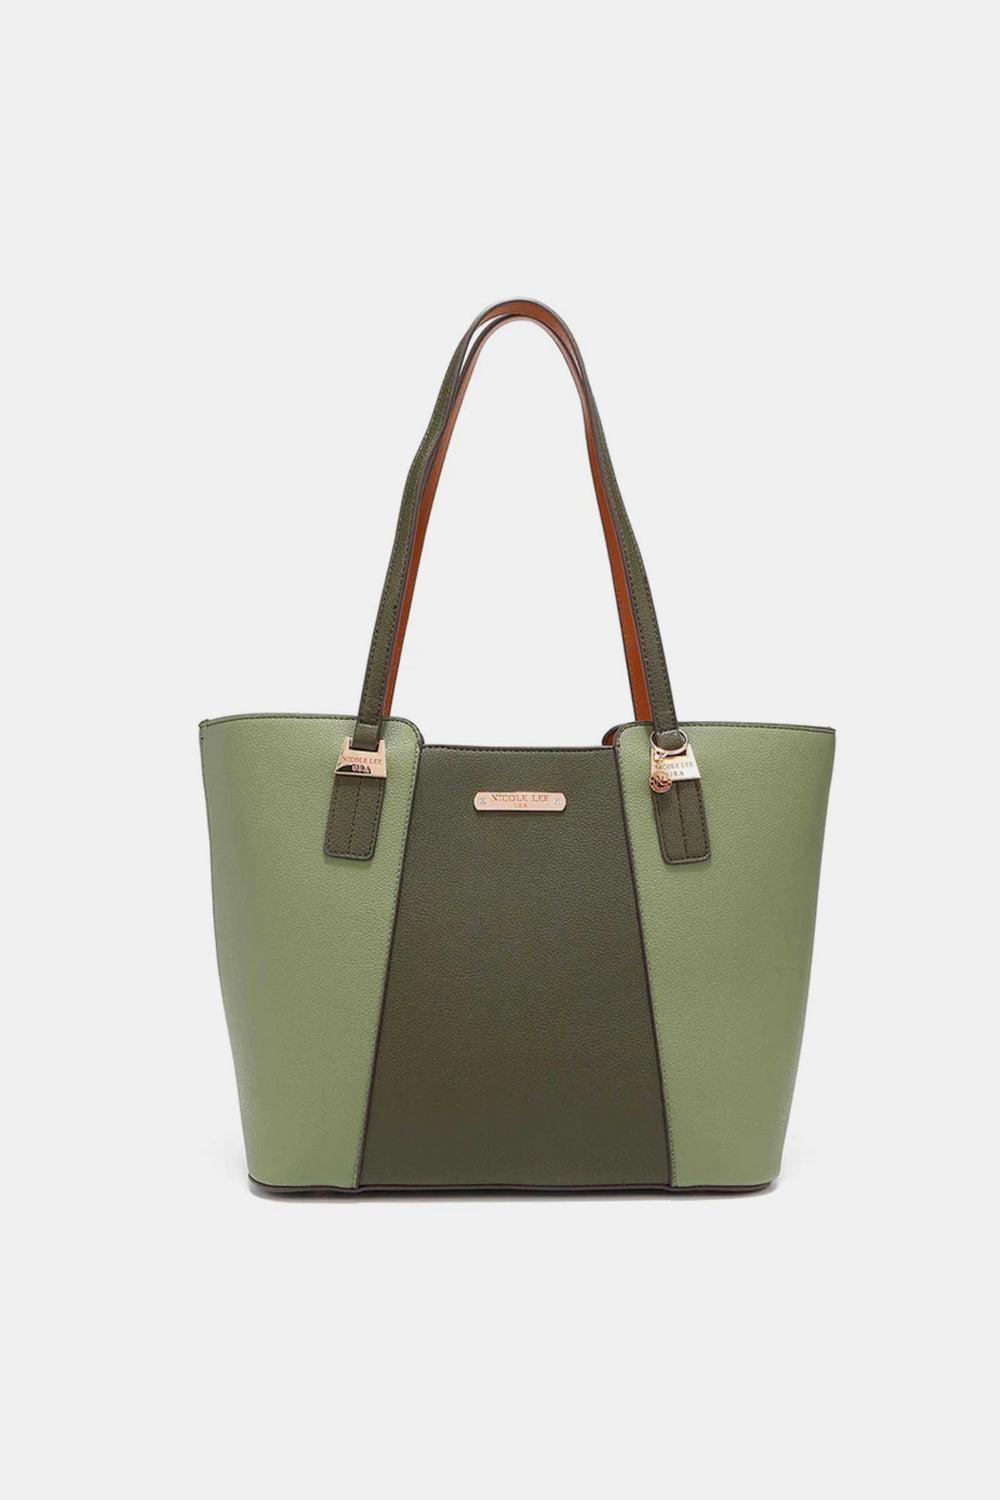 a green and brown handbag on a white background